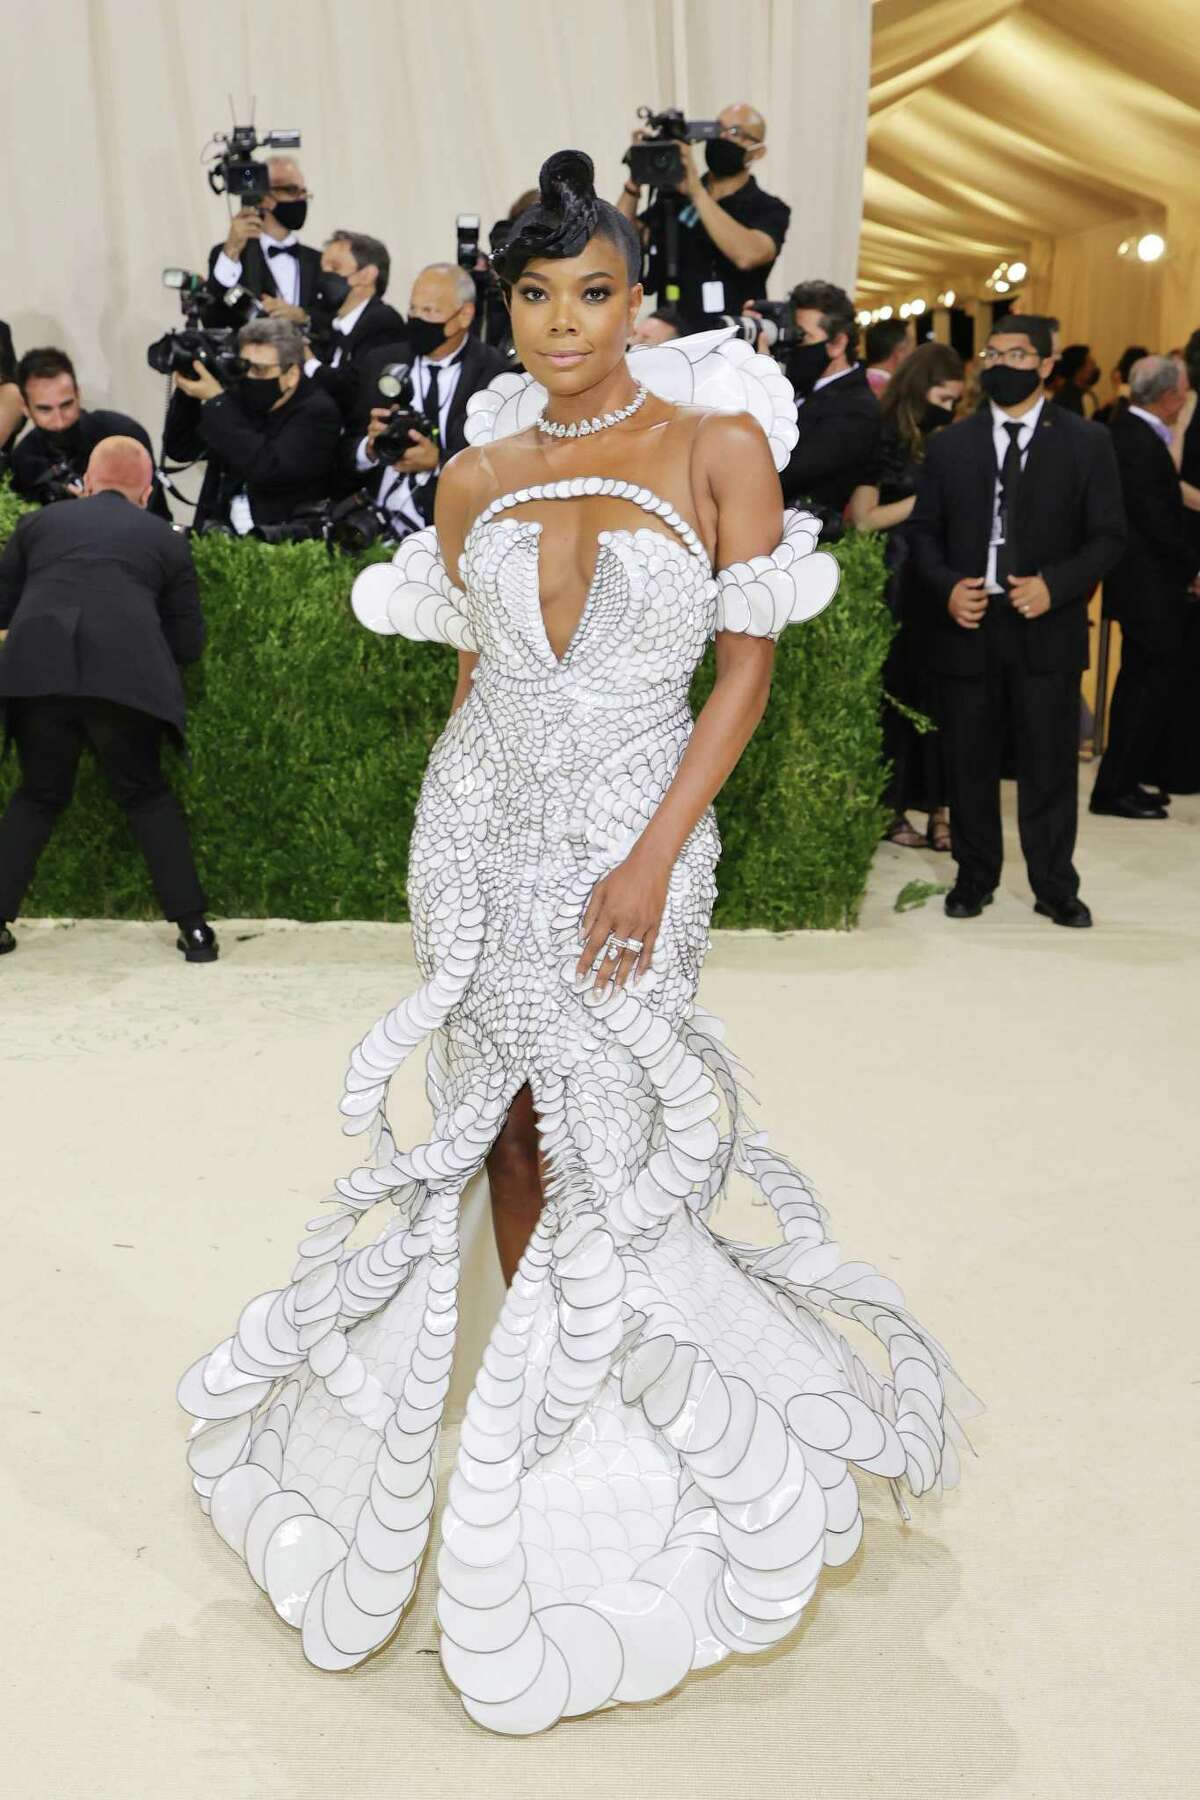 NEW YORK, NEW YORK - SEPTEMBER 13: Gabrielle Union attends The 2021 Met Gala Celebrating In America: A Lexicon Of Fashion at Metropolitan Museum of Art on September 13, 2021 in New York City. (Photo by Mike Coppola/Getty Images)